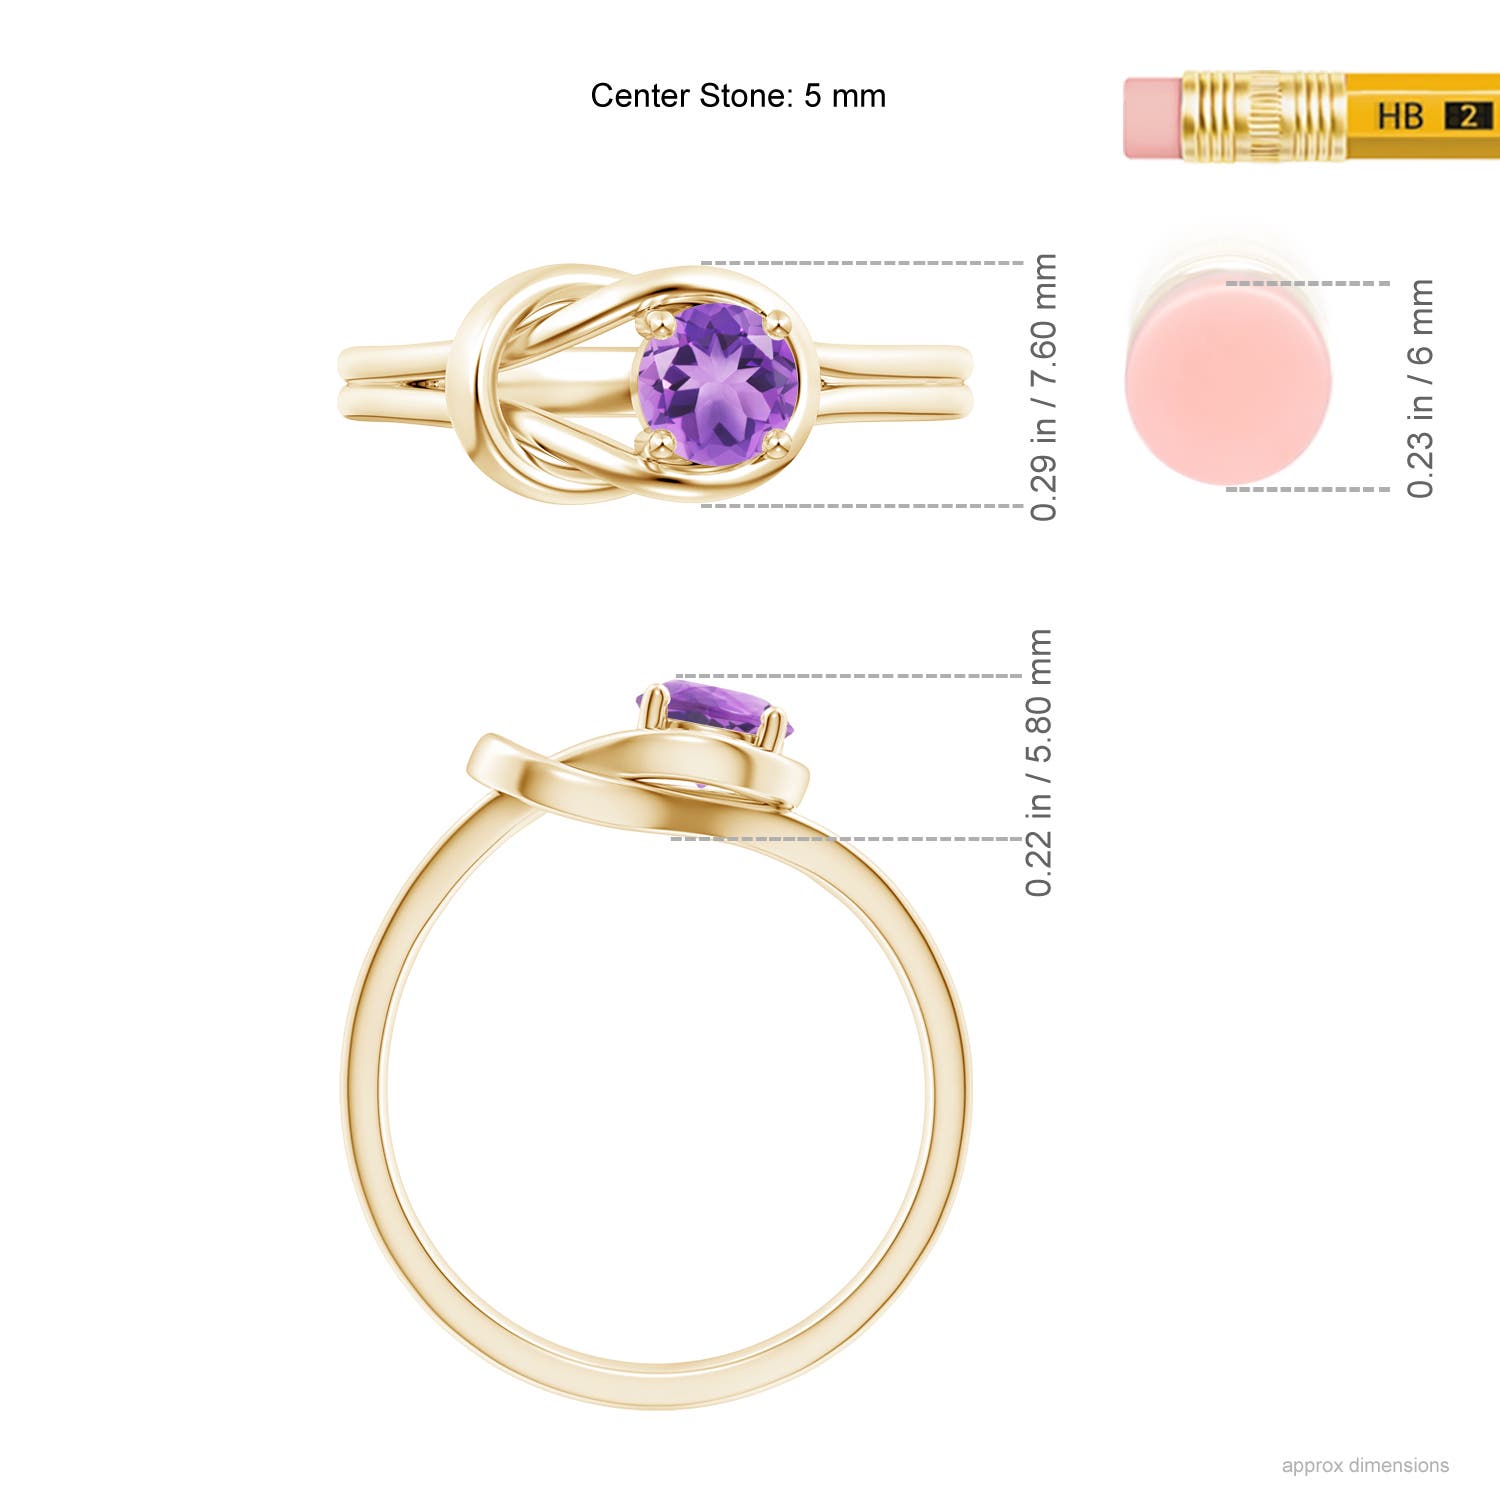 A - Amethyst / 0.45 CT / 14 KT Yellow Gold